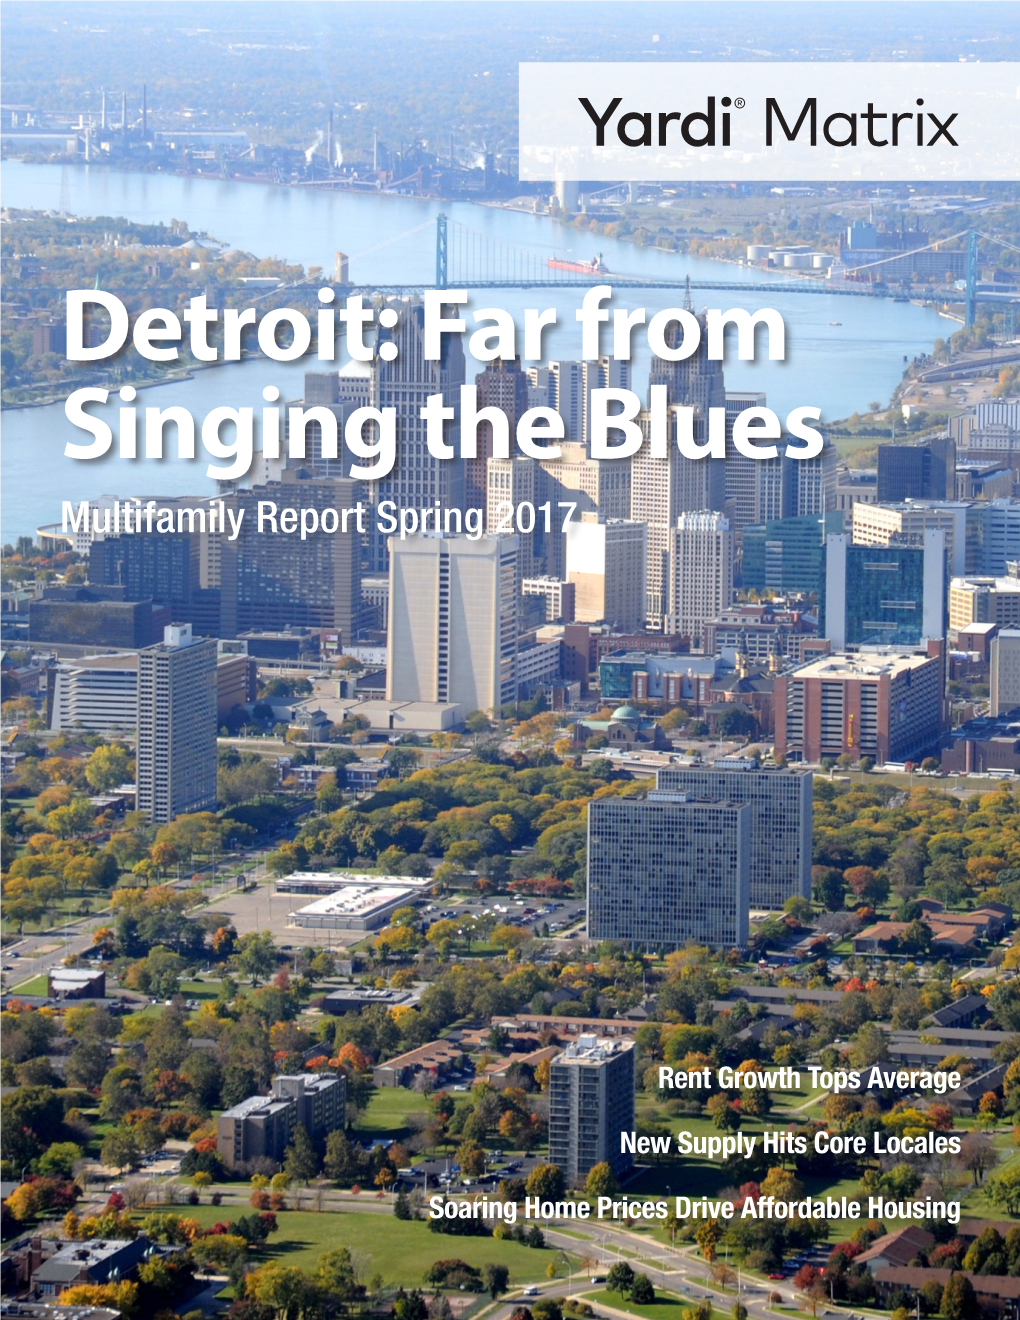 Detroit: Far from Singing the Blues Multifamily Report Spring 2017